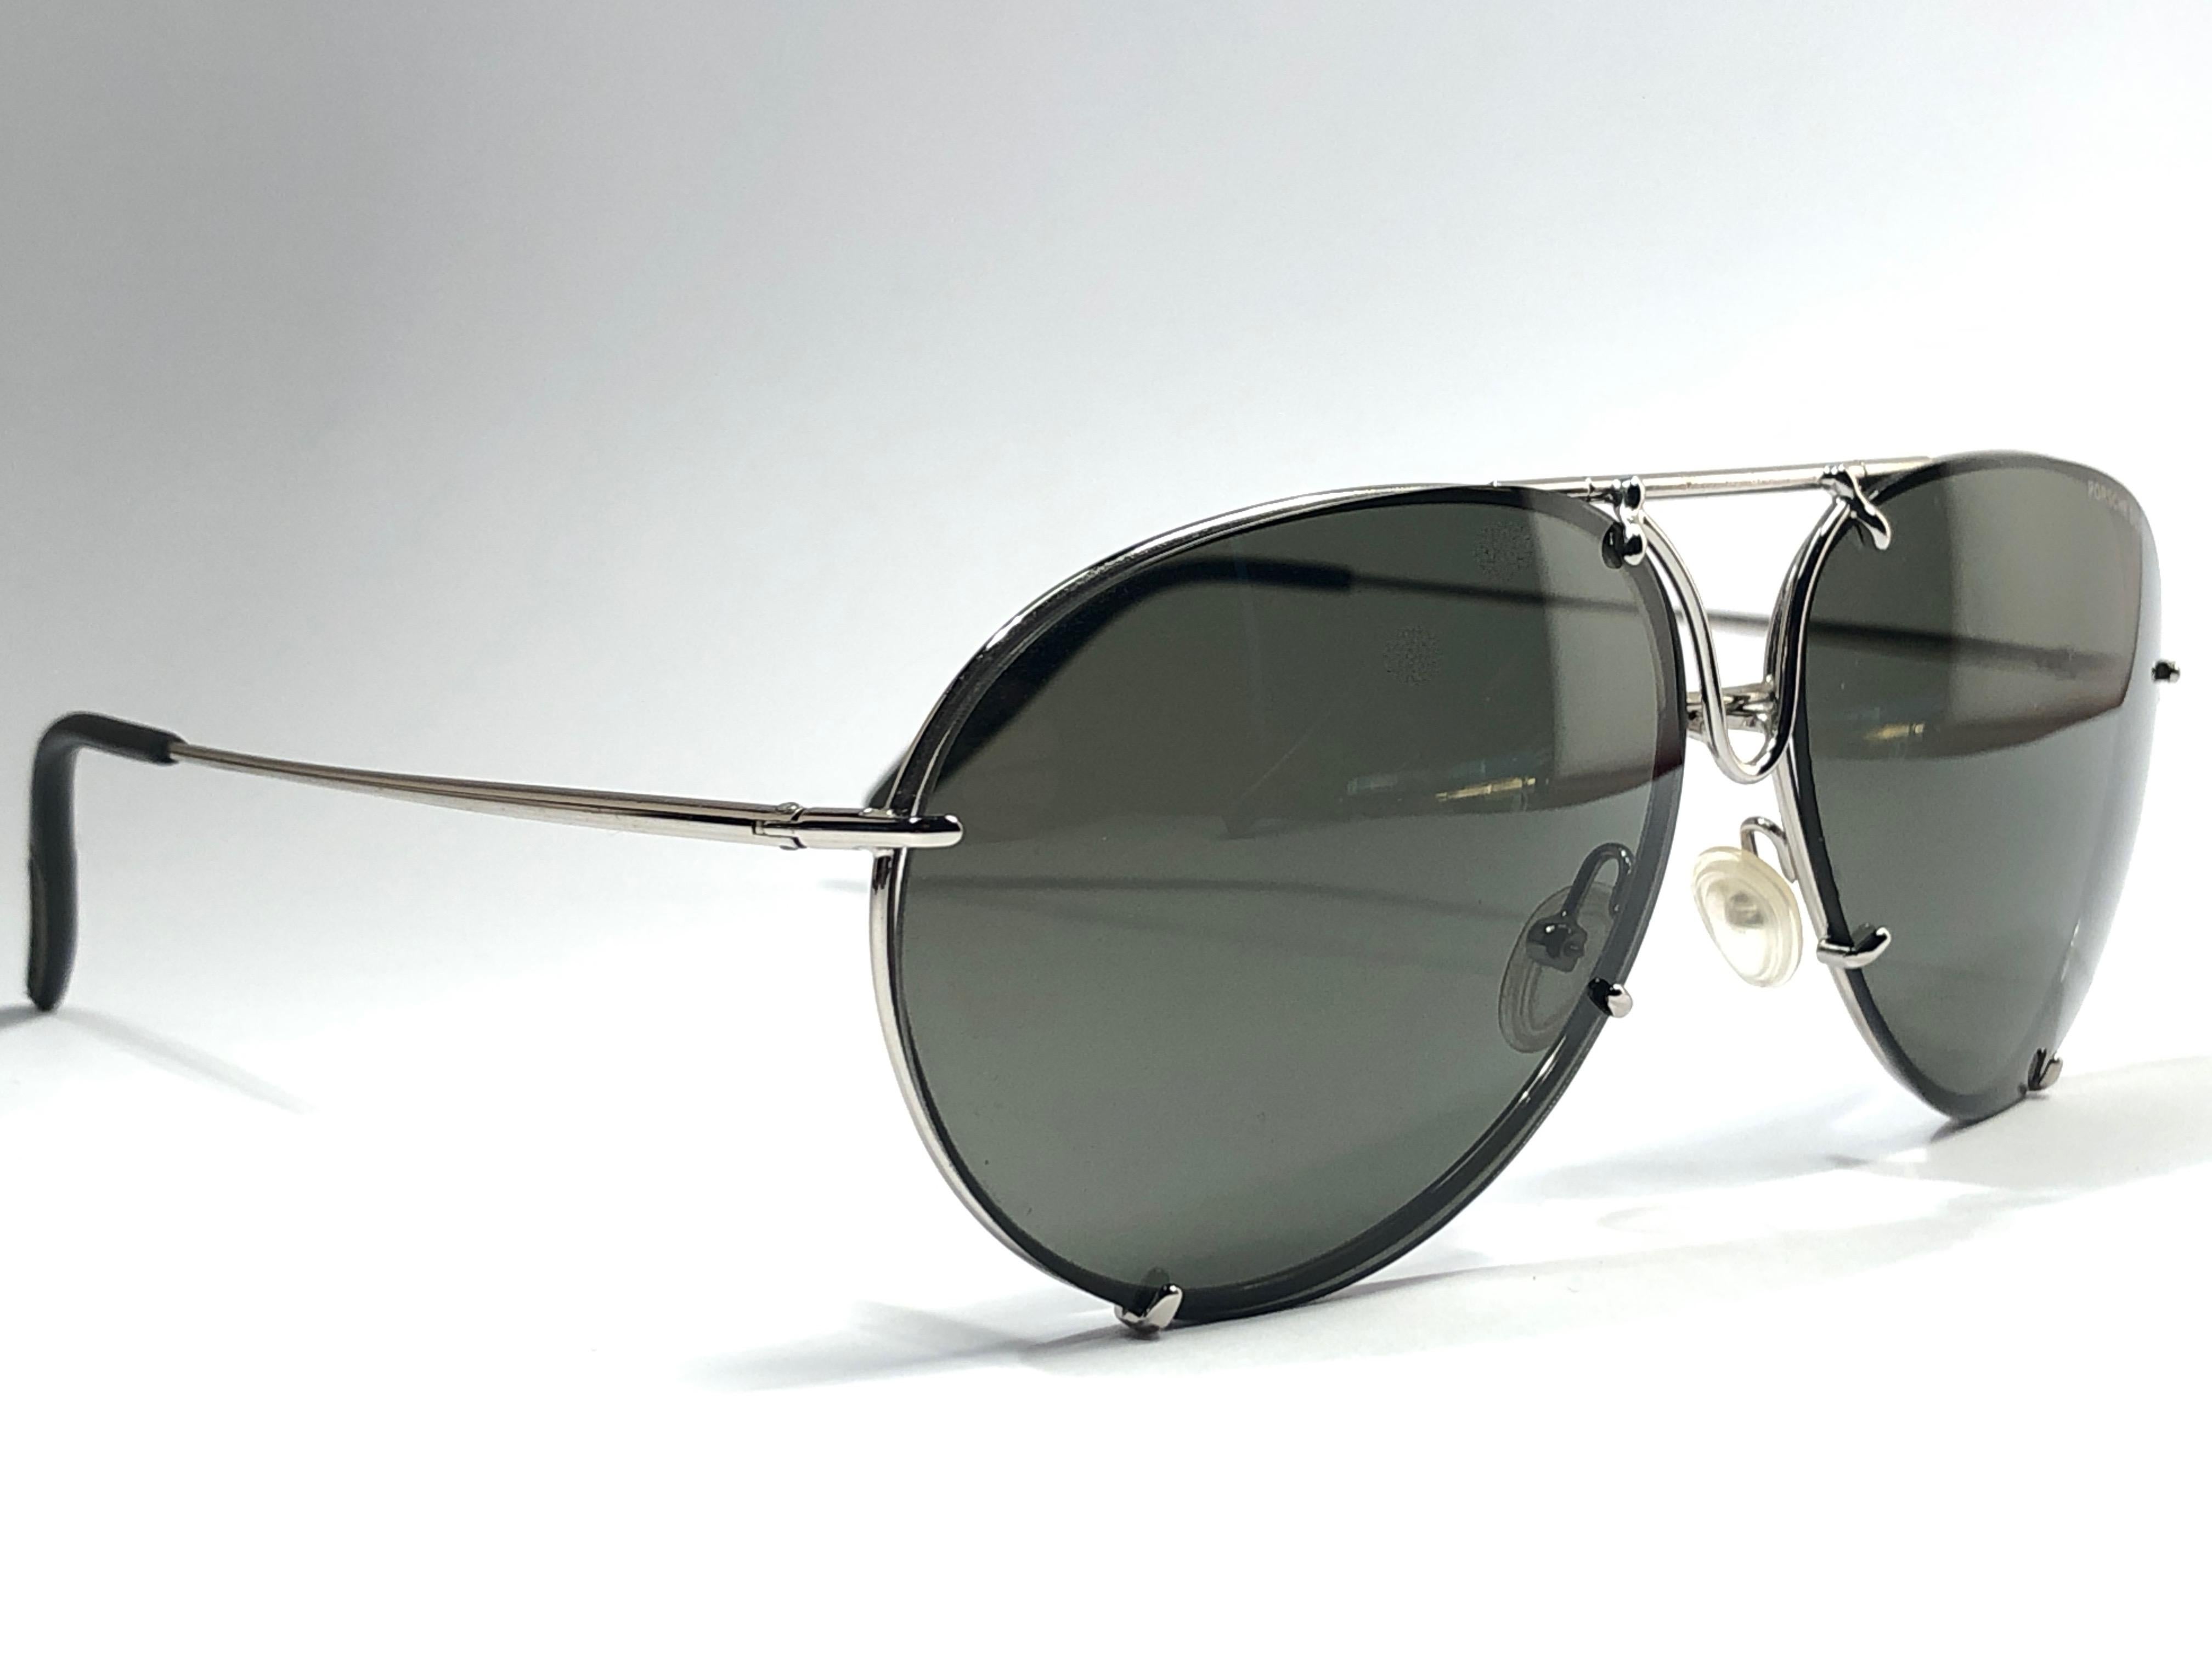 New 1980's Porsche Design P1010 silver medium aviator frame with smoke grey lenses.  

Amazing craftsmanship and quality.  
Comes with the original black Porsche hard case thats has some wear on it due to nearly 40 years of storage. This item show